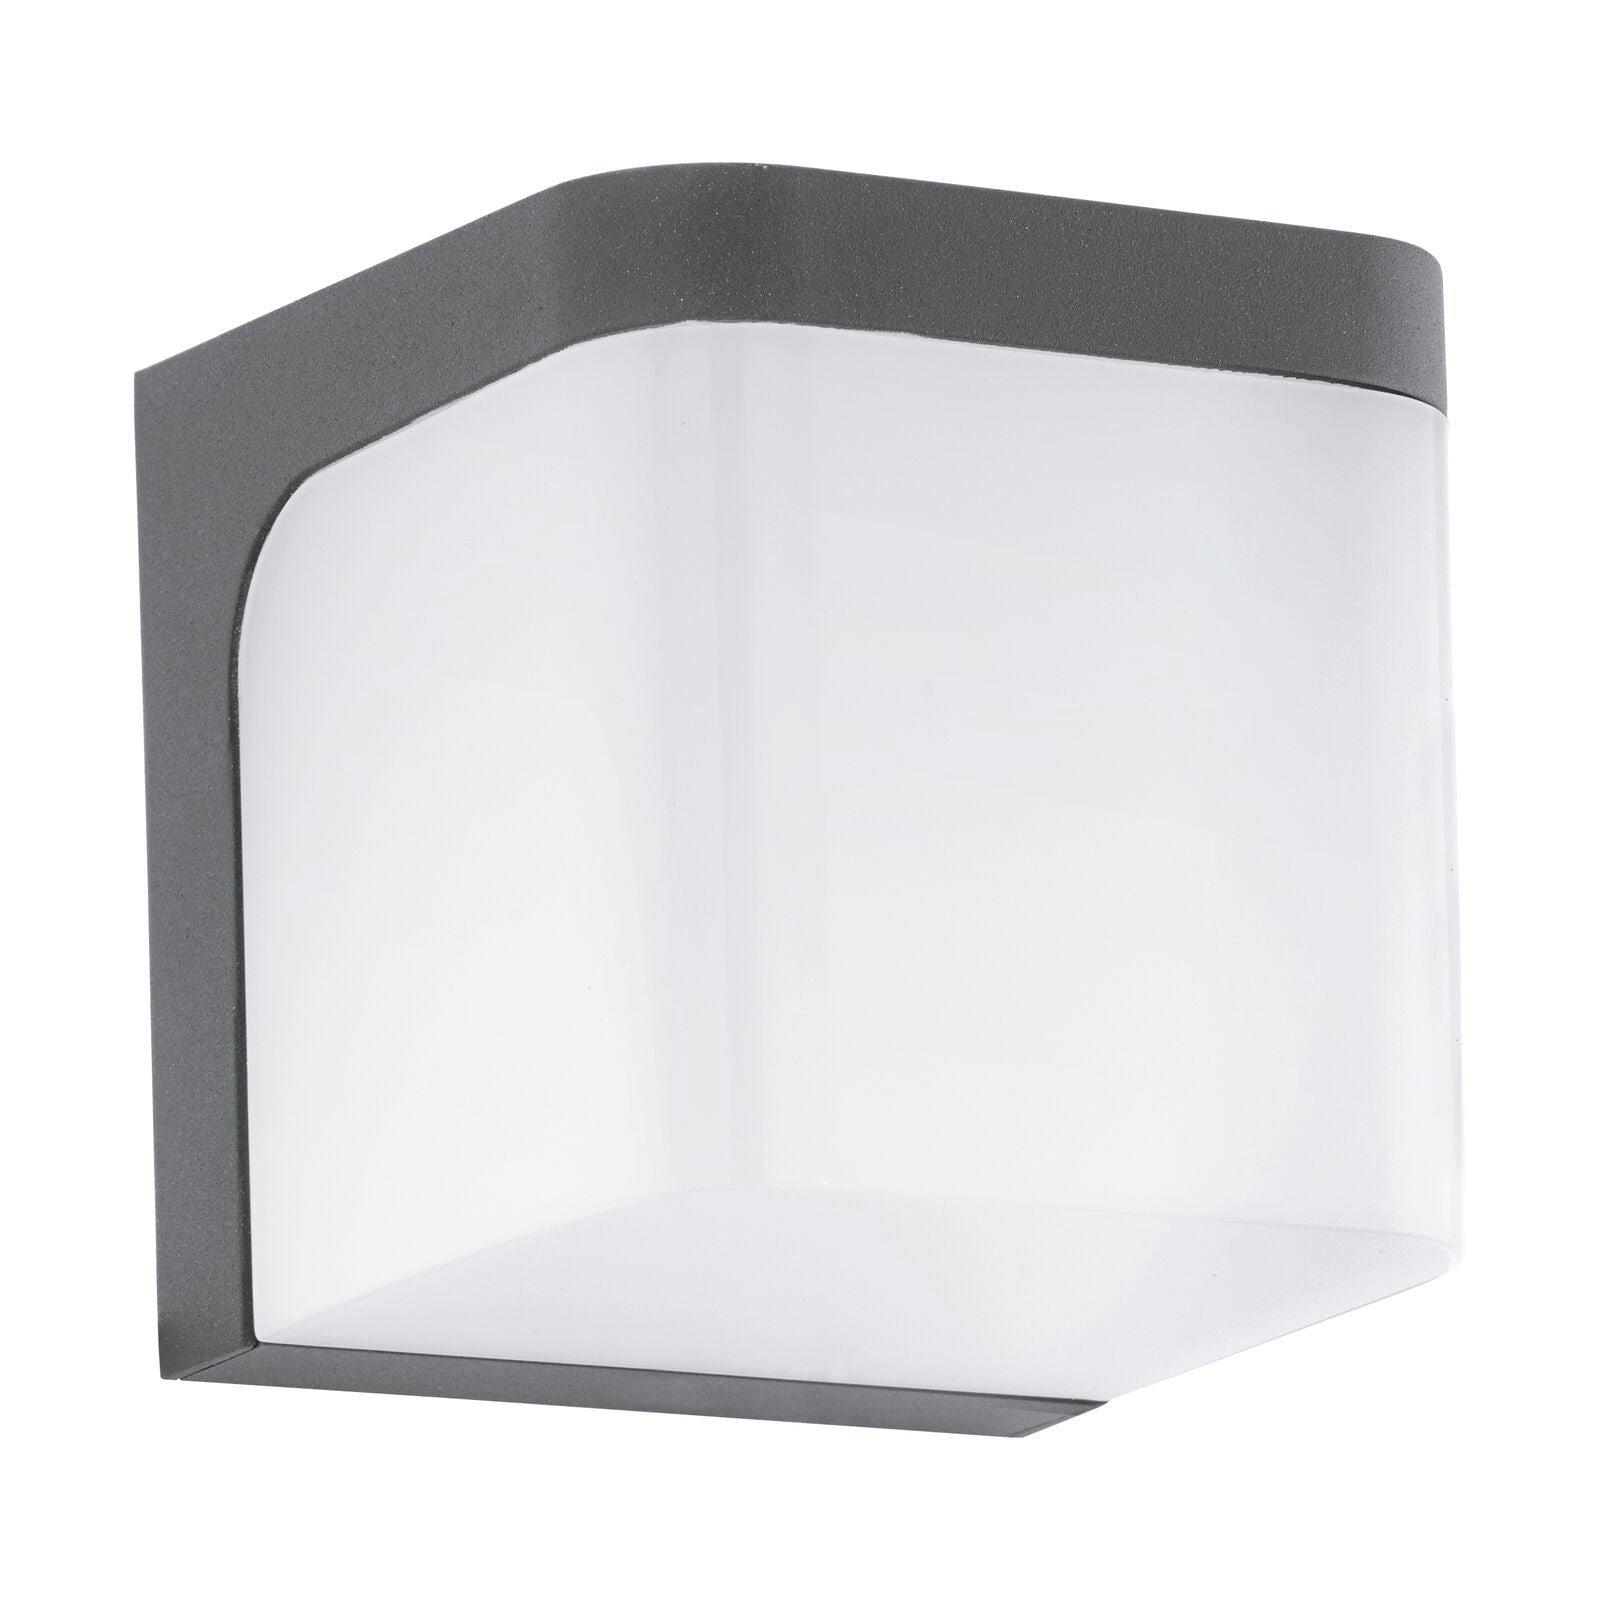 IP44 Outdoor Wall Light Anthracite Cast Aluminium 6W Built in LED Lamp